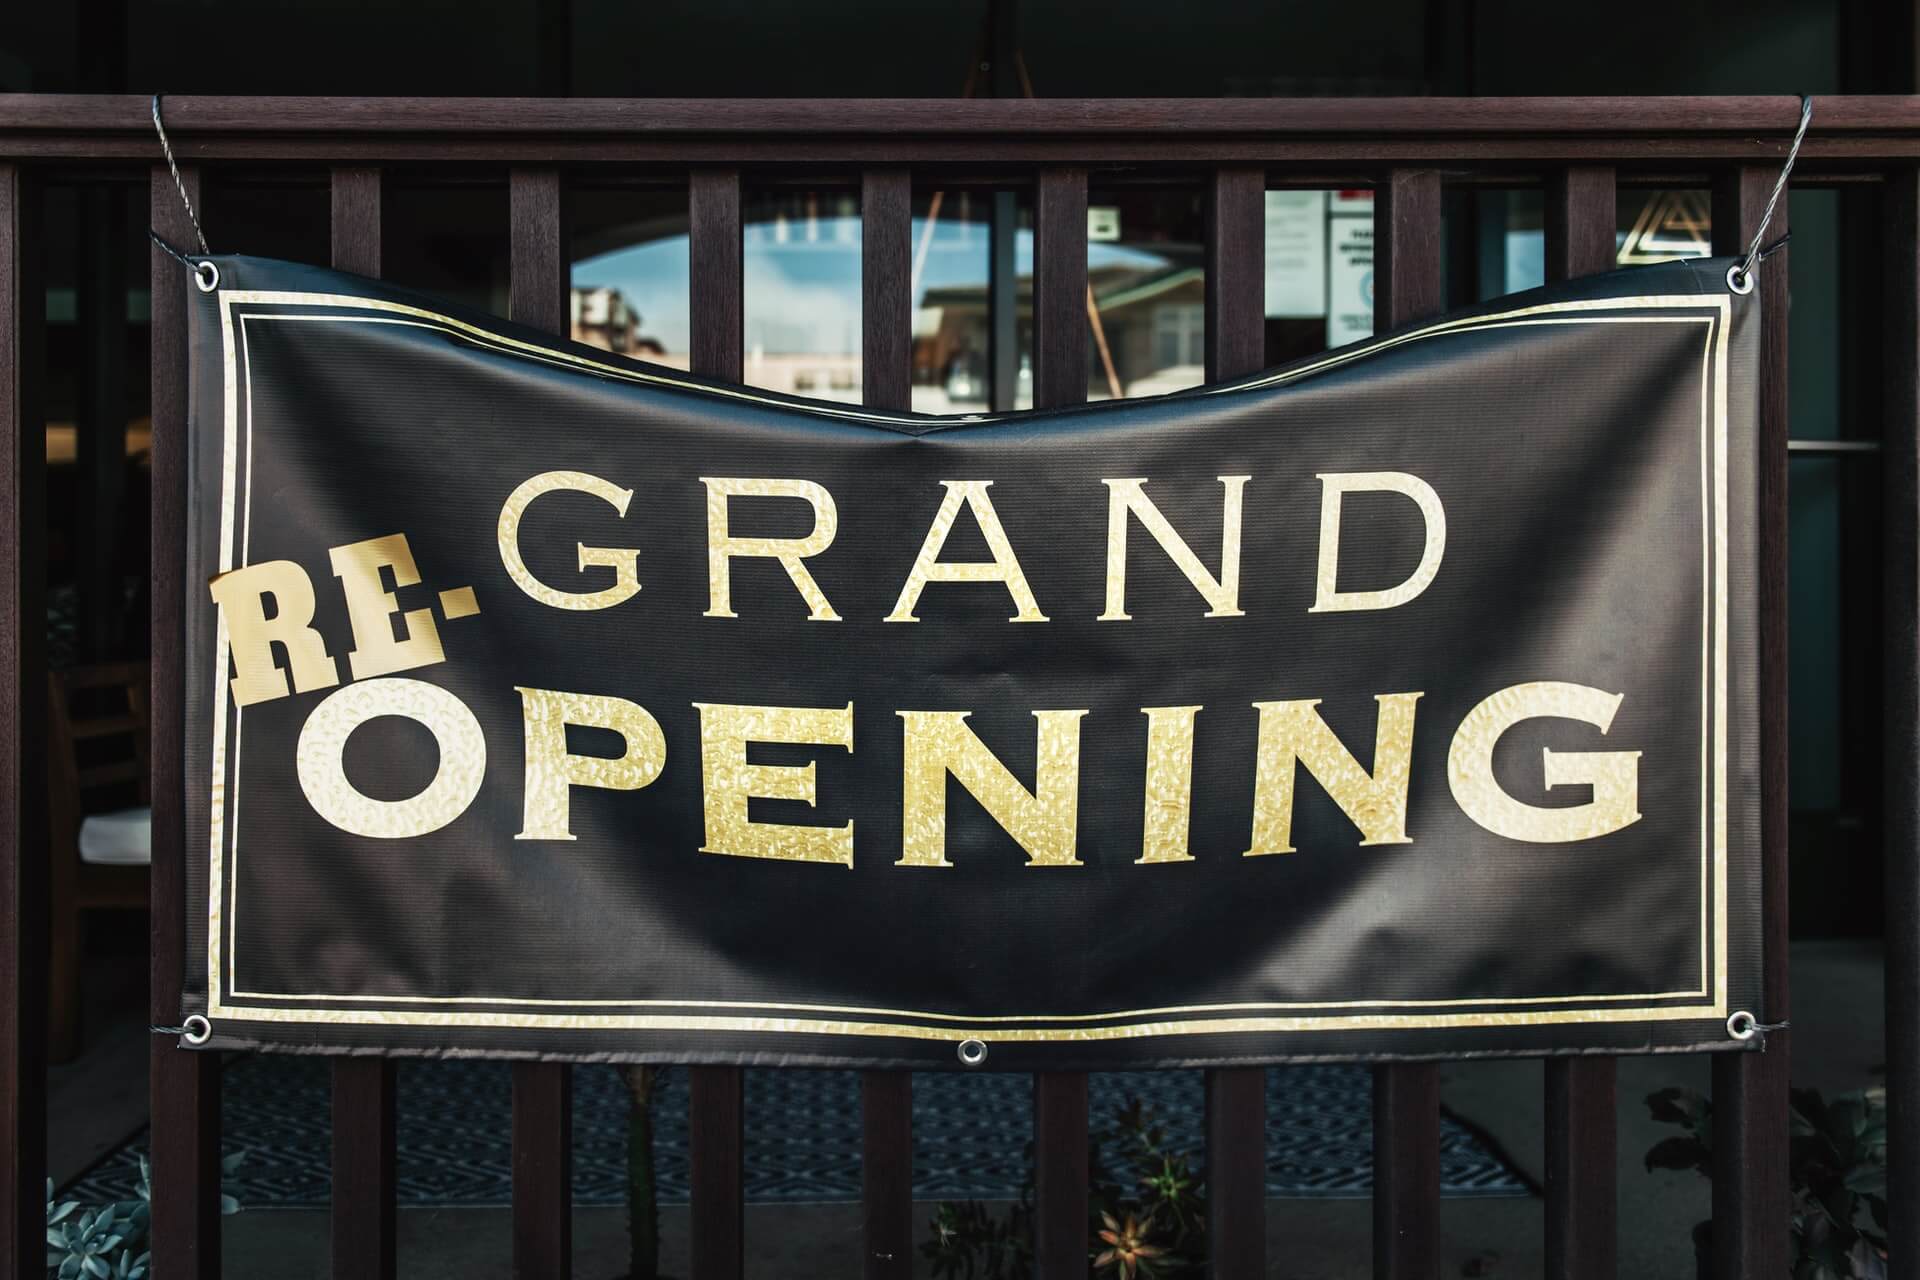 Grand re-opening sign